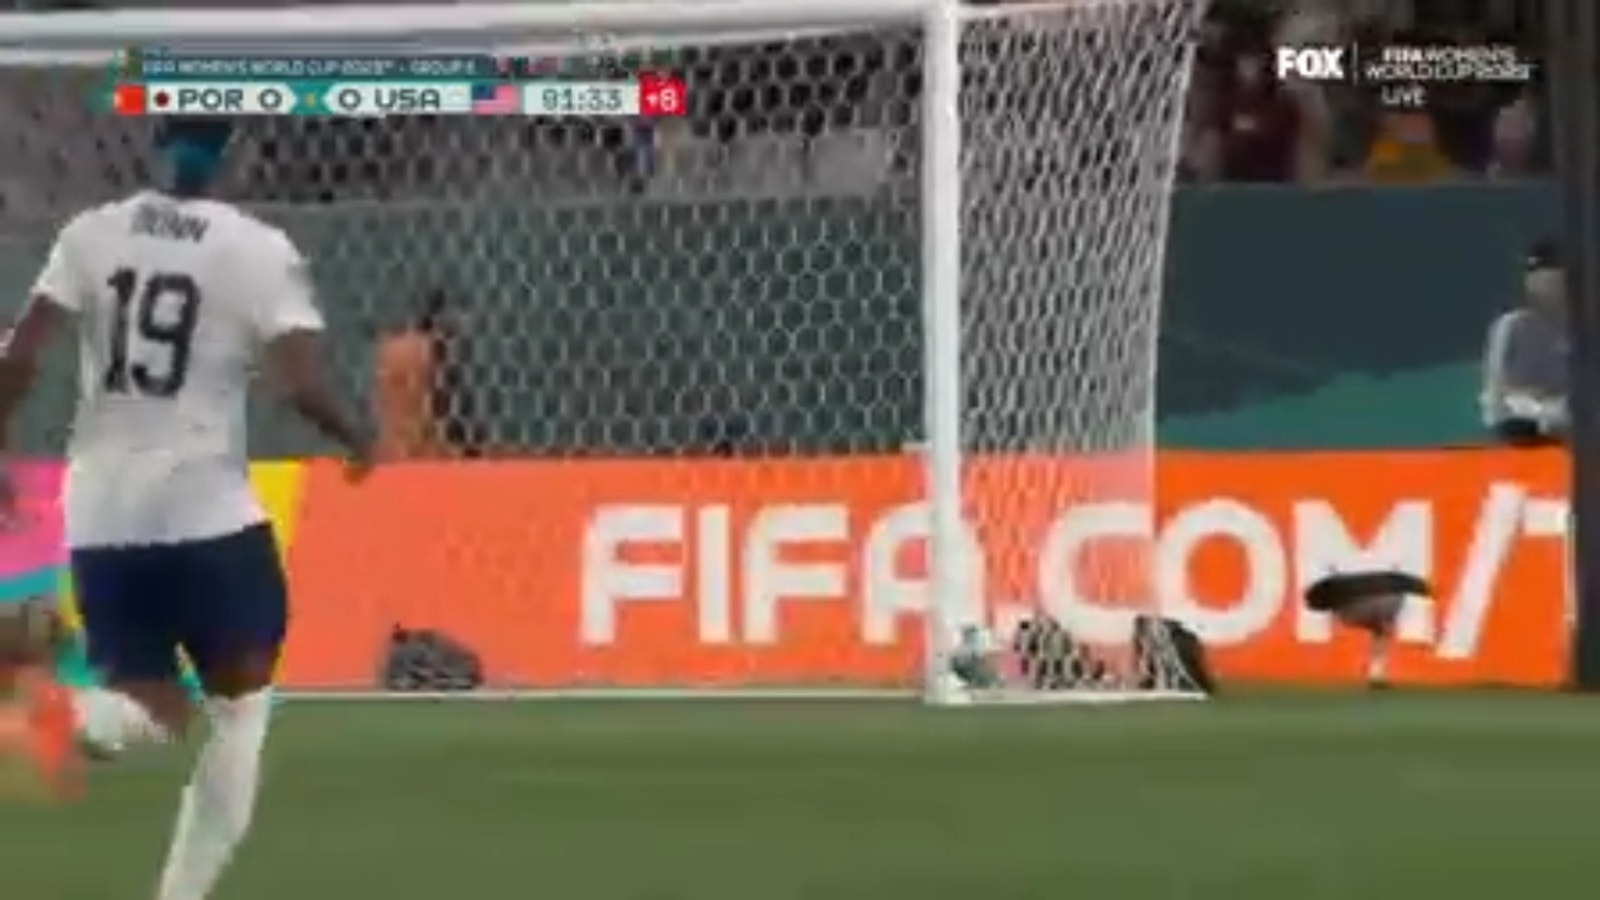 Portugal's Ana Capeta was INCHES away from eliminating the USWNT